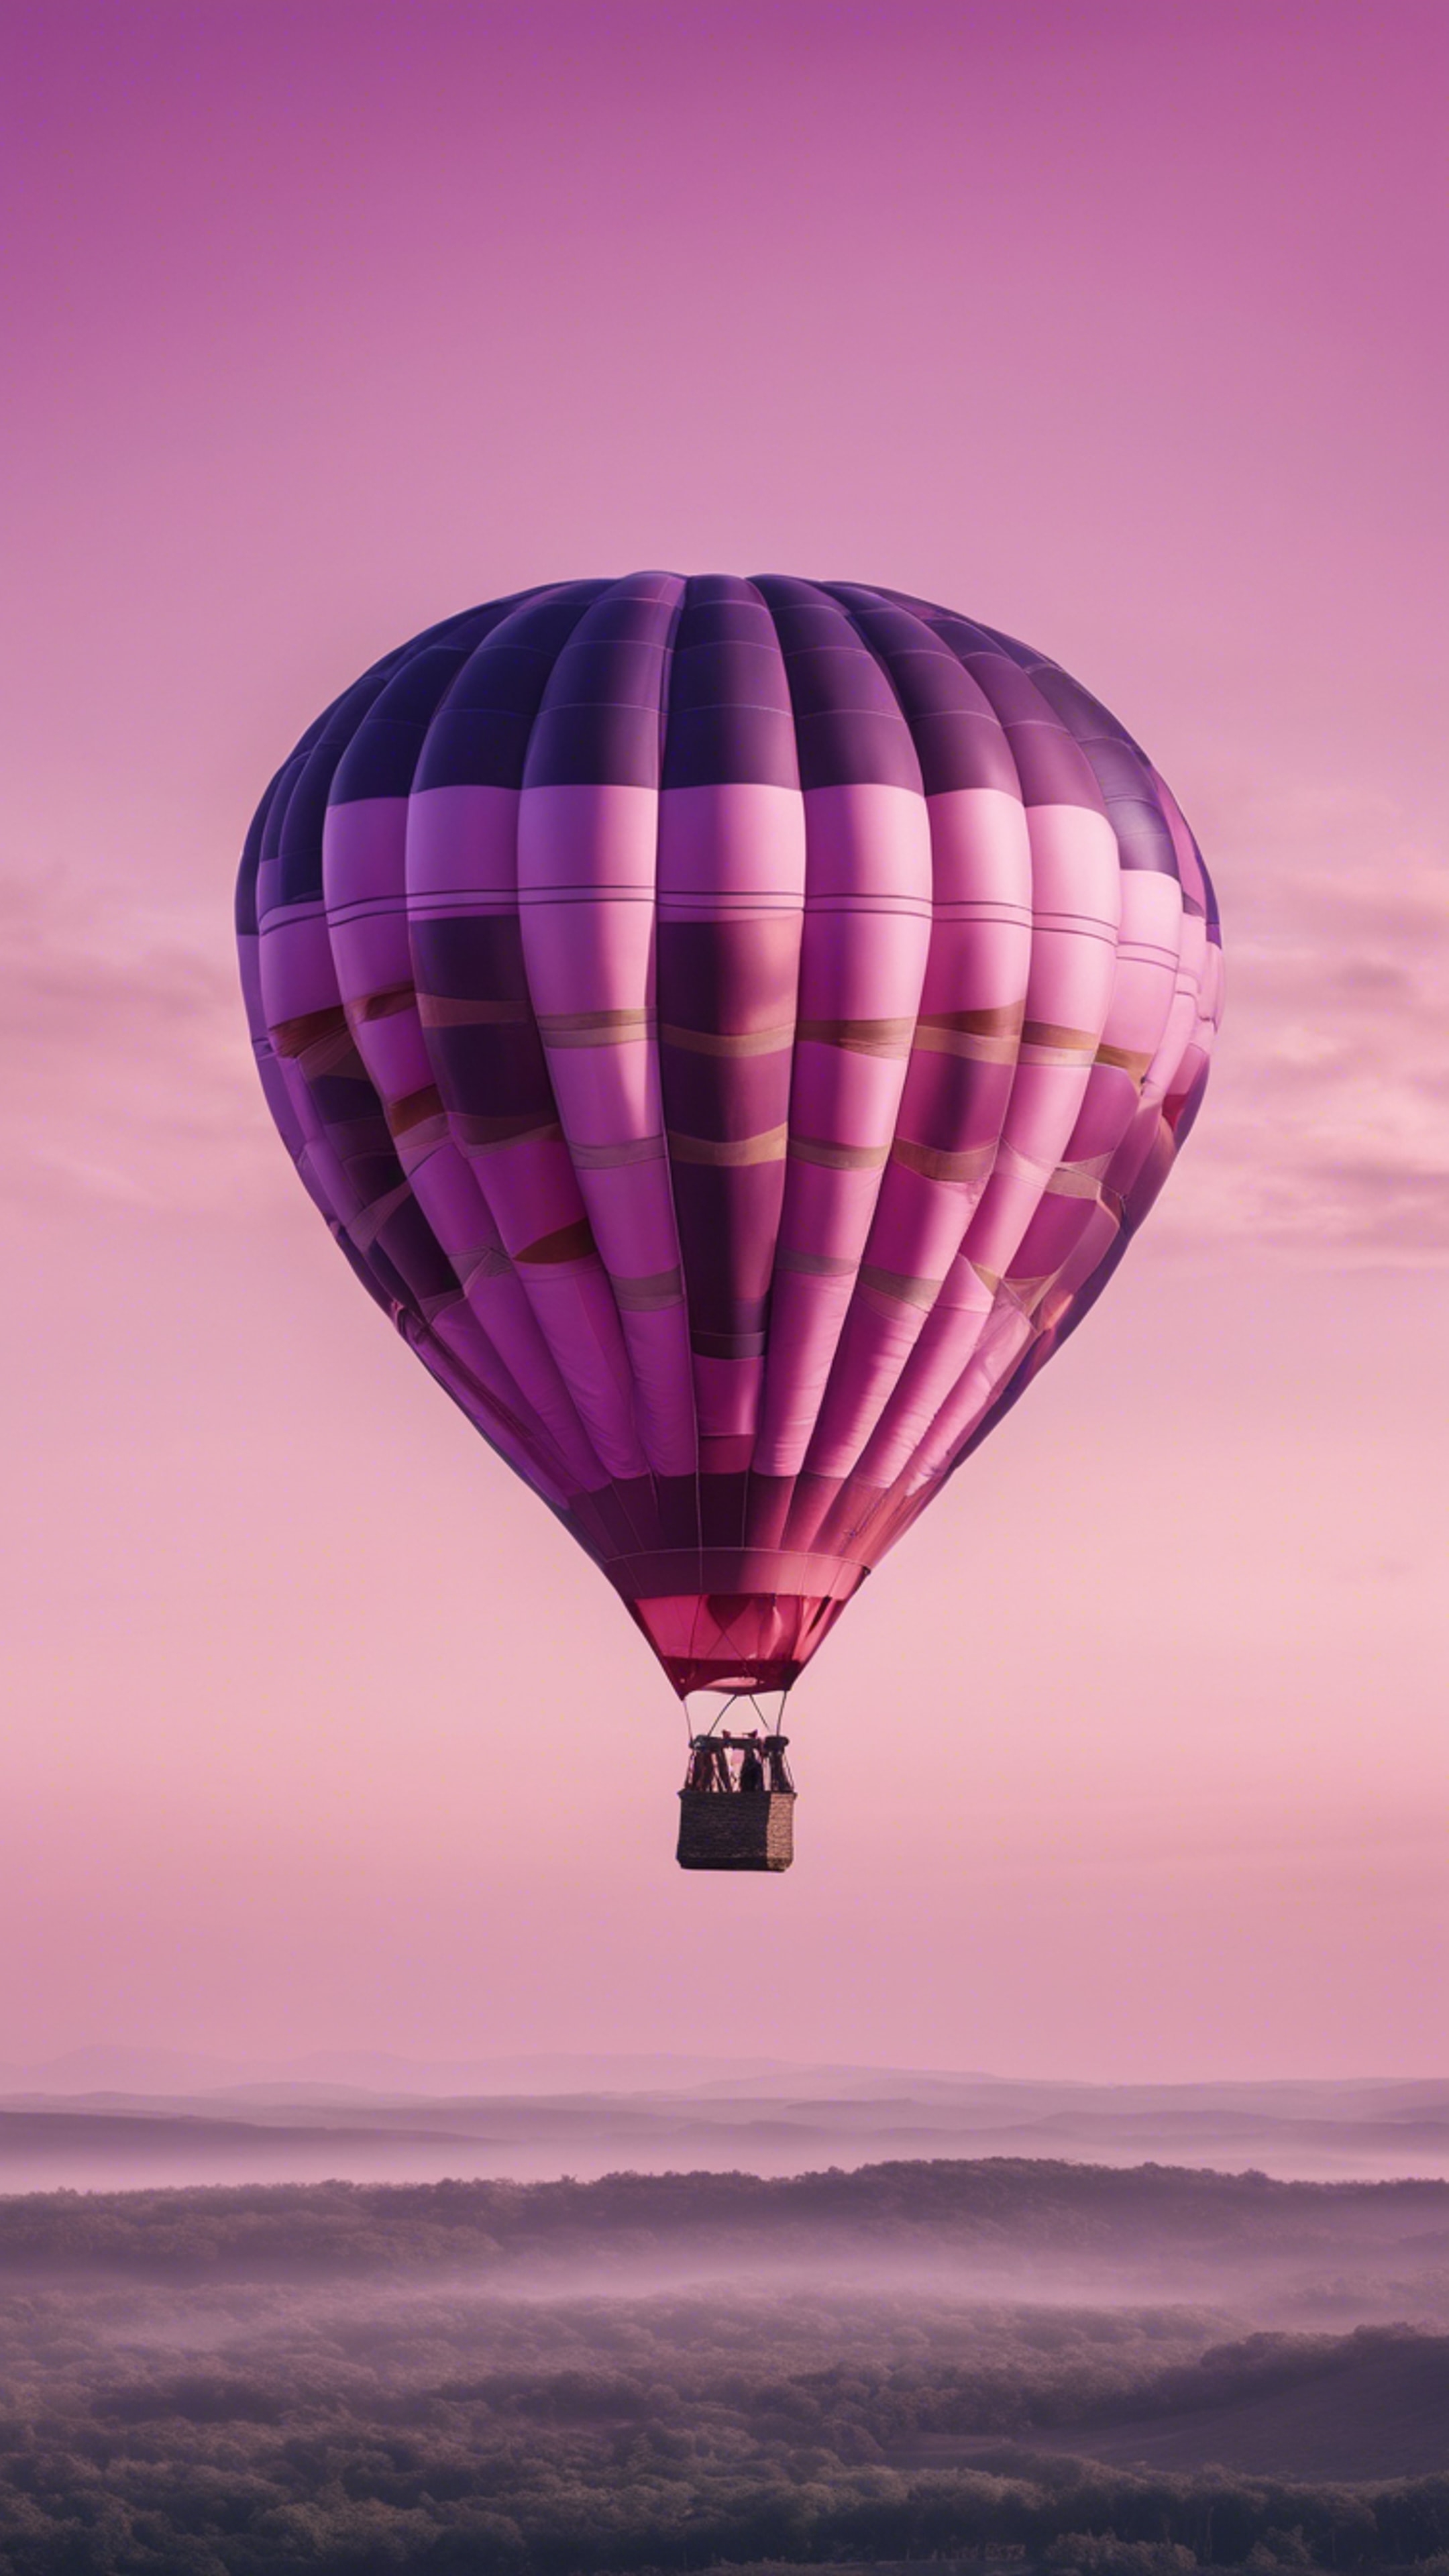 A pink and purple striped hot air balloon floating in a clear morning sky. Kertas dinding[24bb758d911f4cfb8c8f]